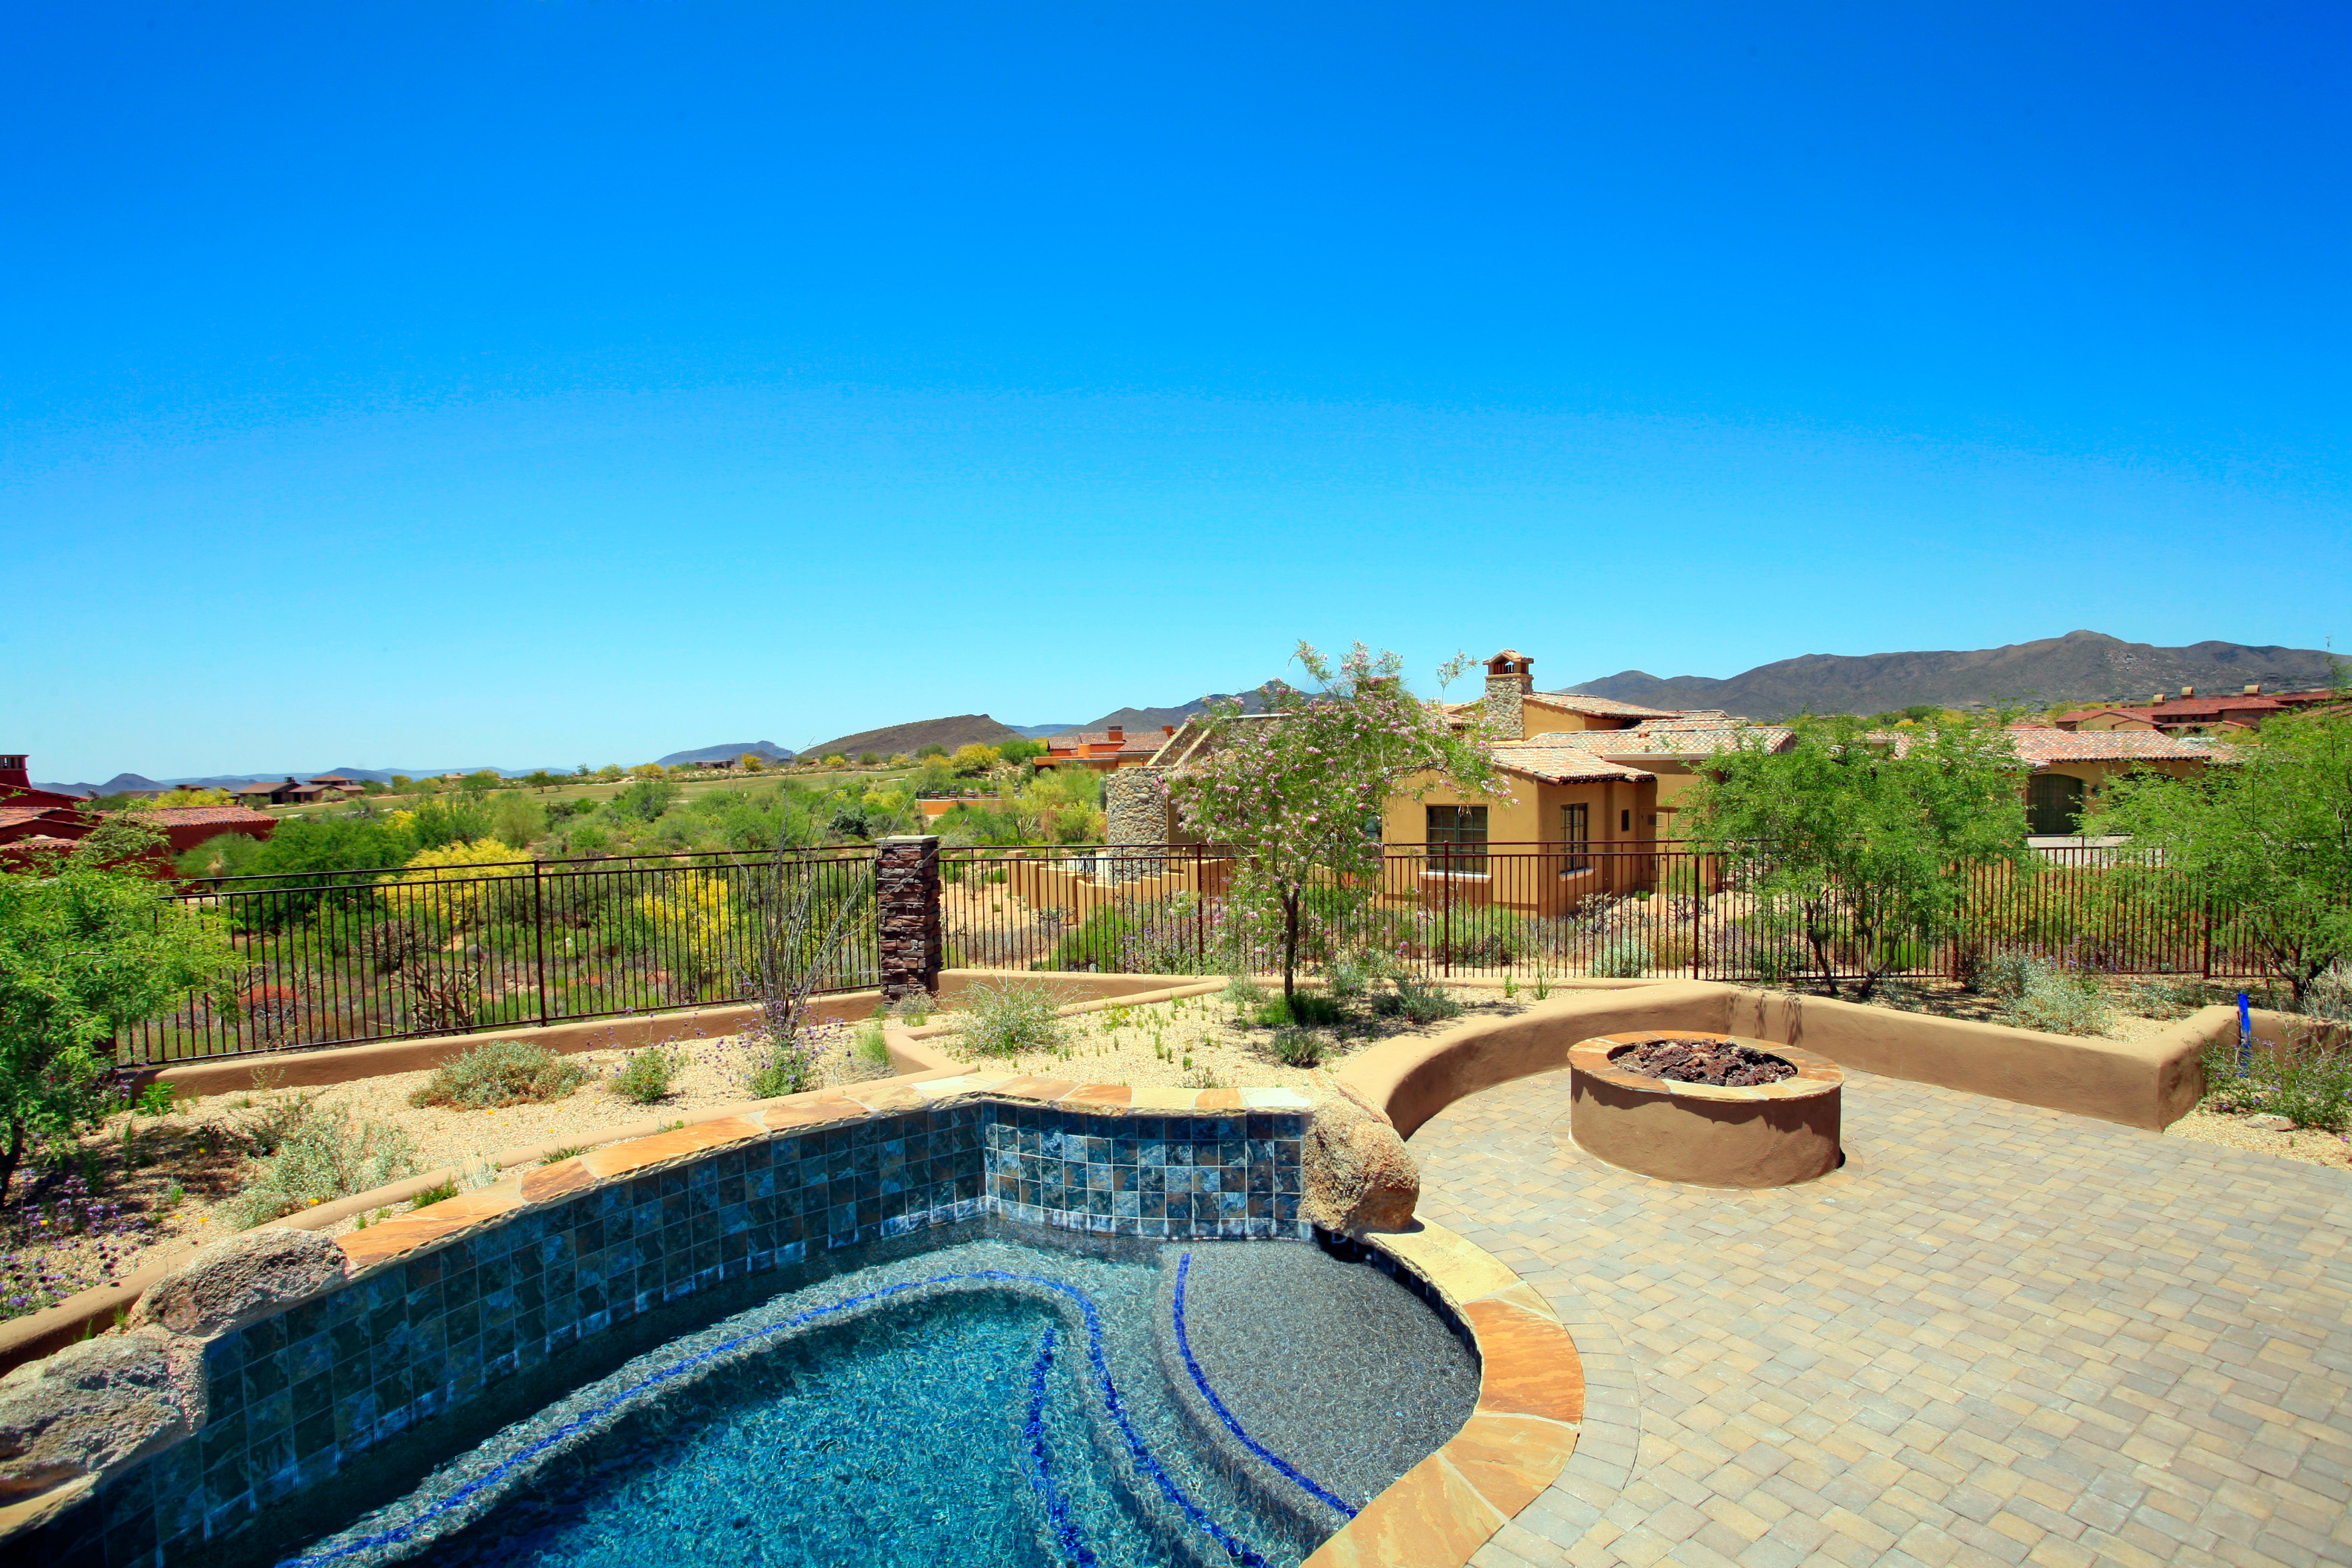  For Sale In Scottsdale Arizona Under HD Walls Find Wallpapers